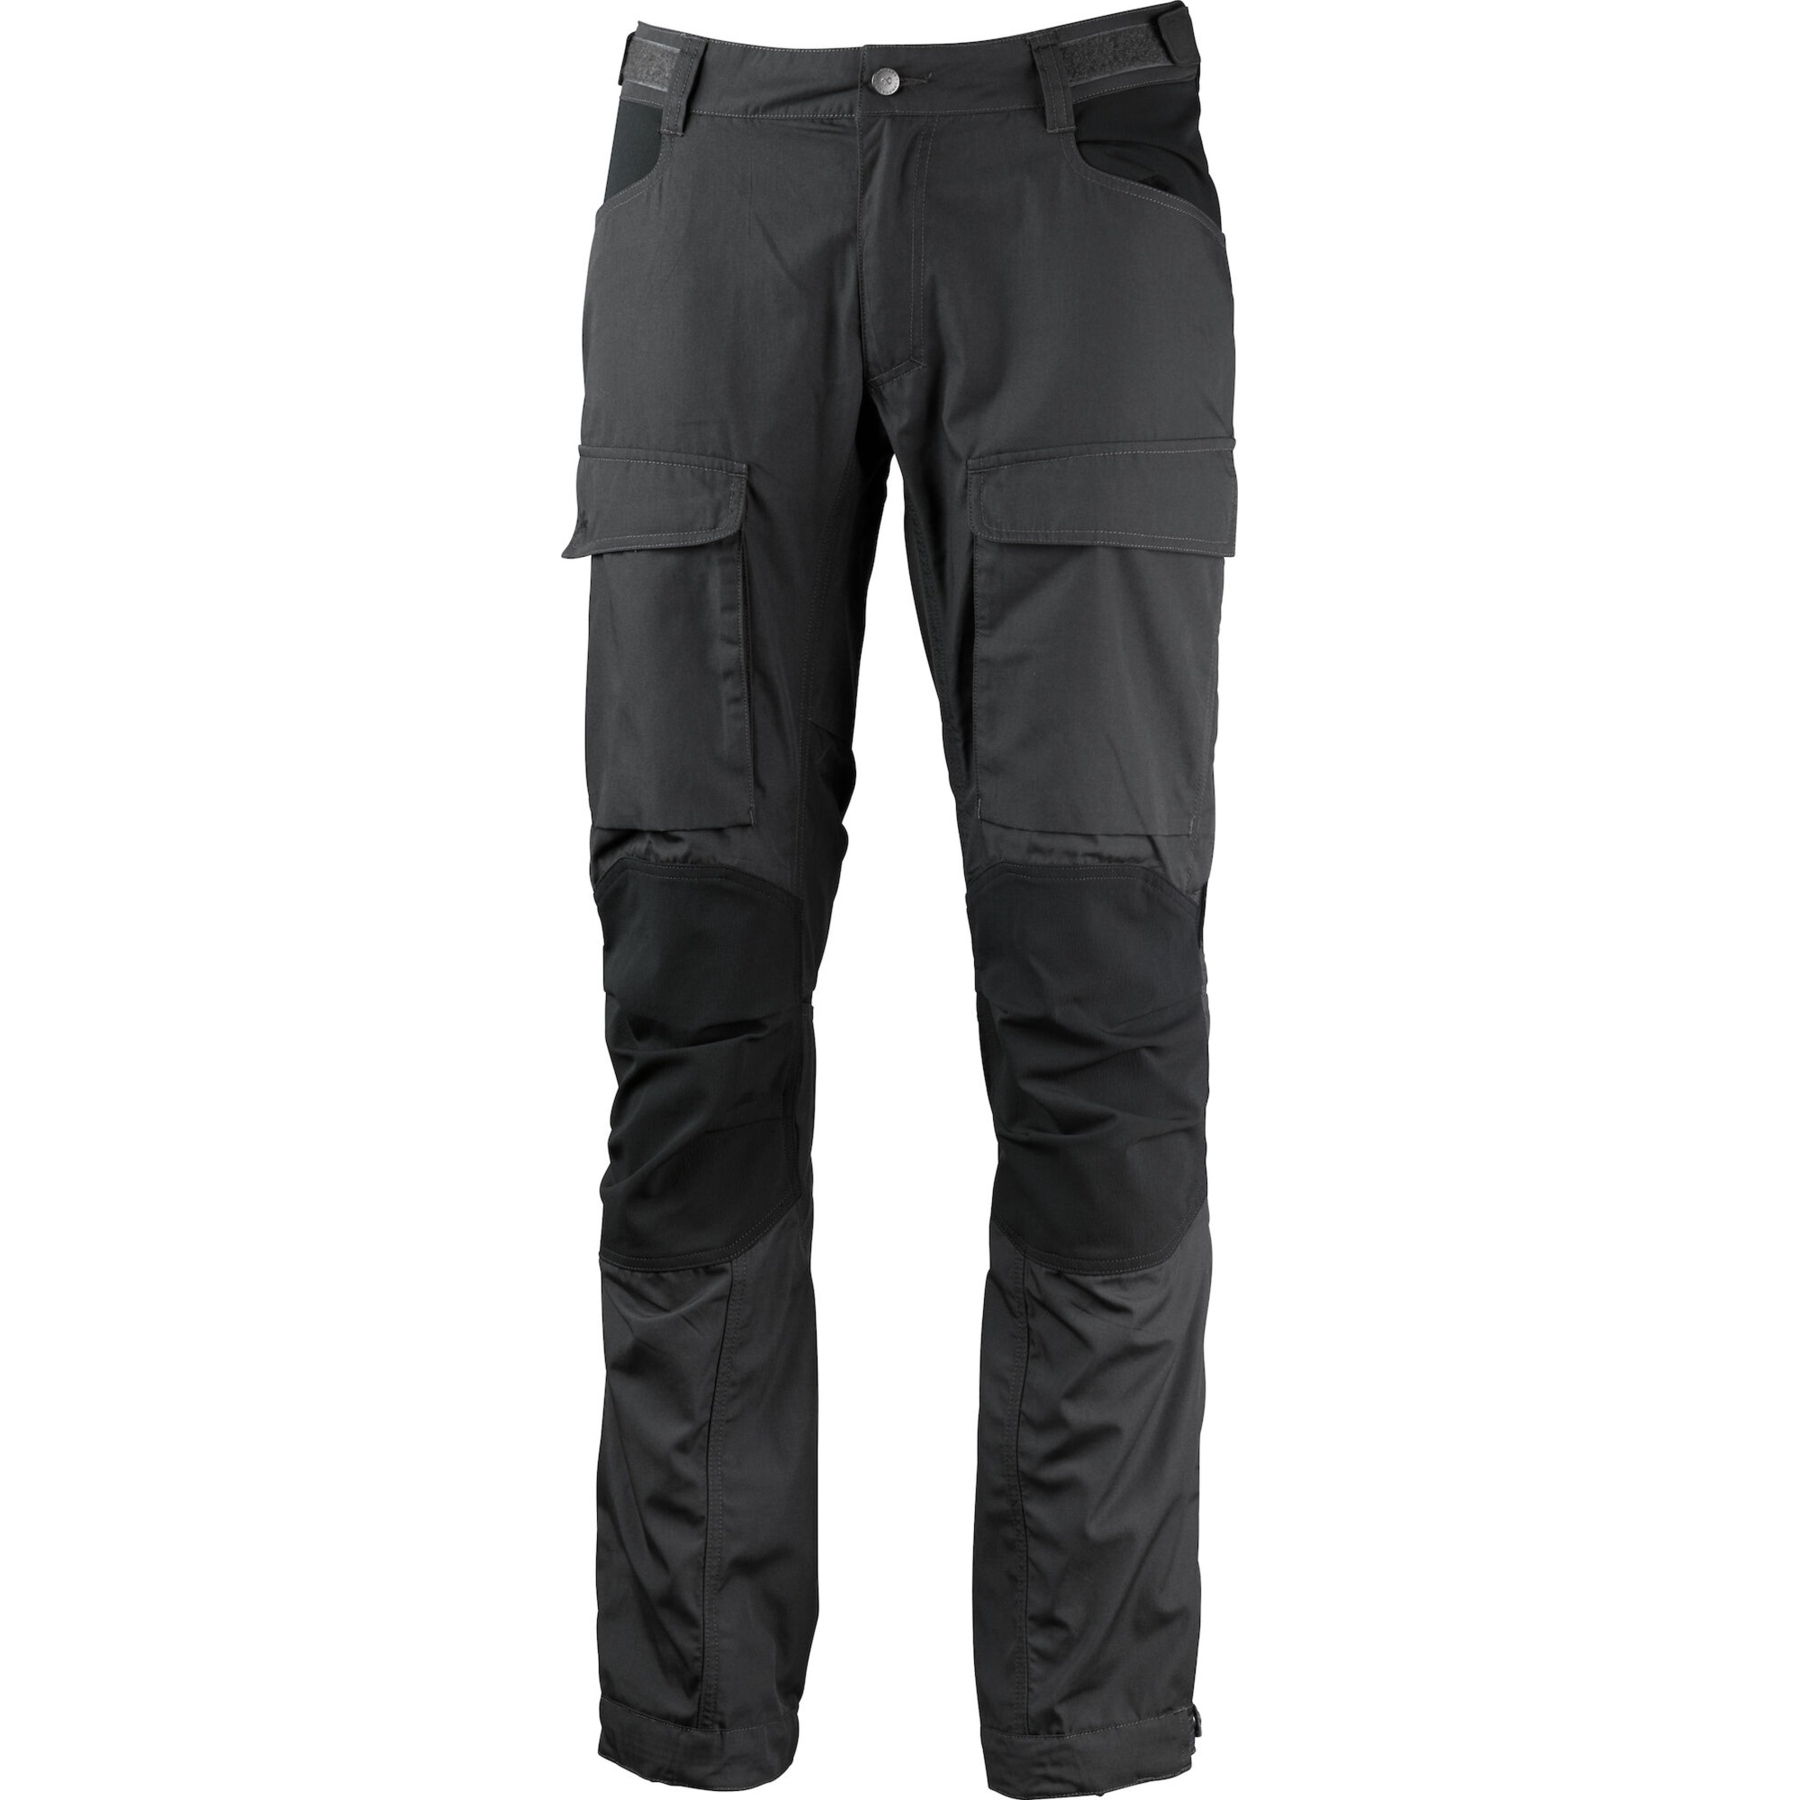 Image of Lundhags Authentic II Hiking Pants Long - Granite/Charcoal 834